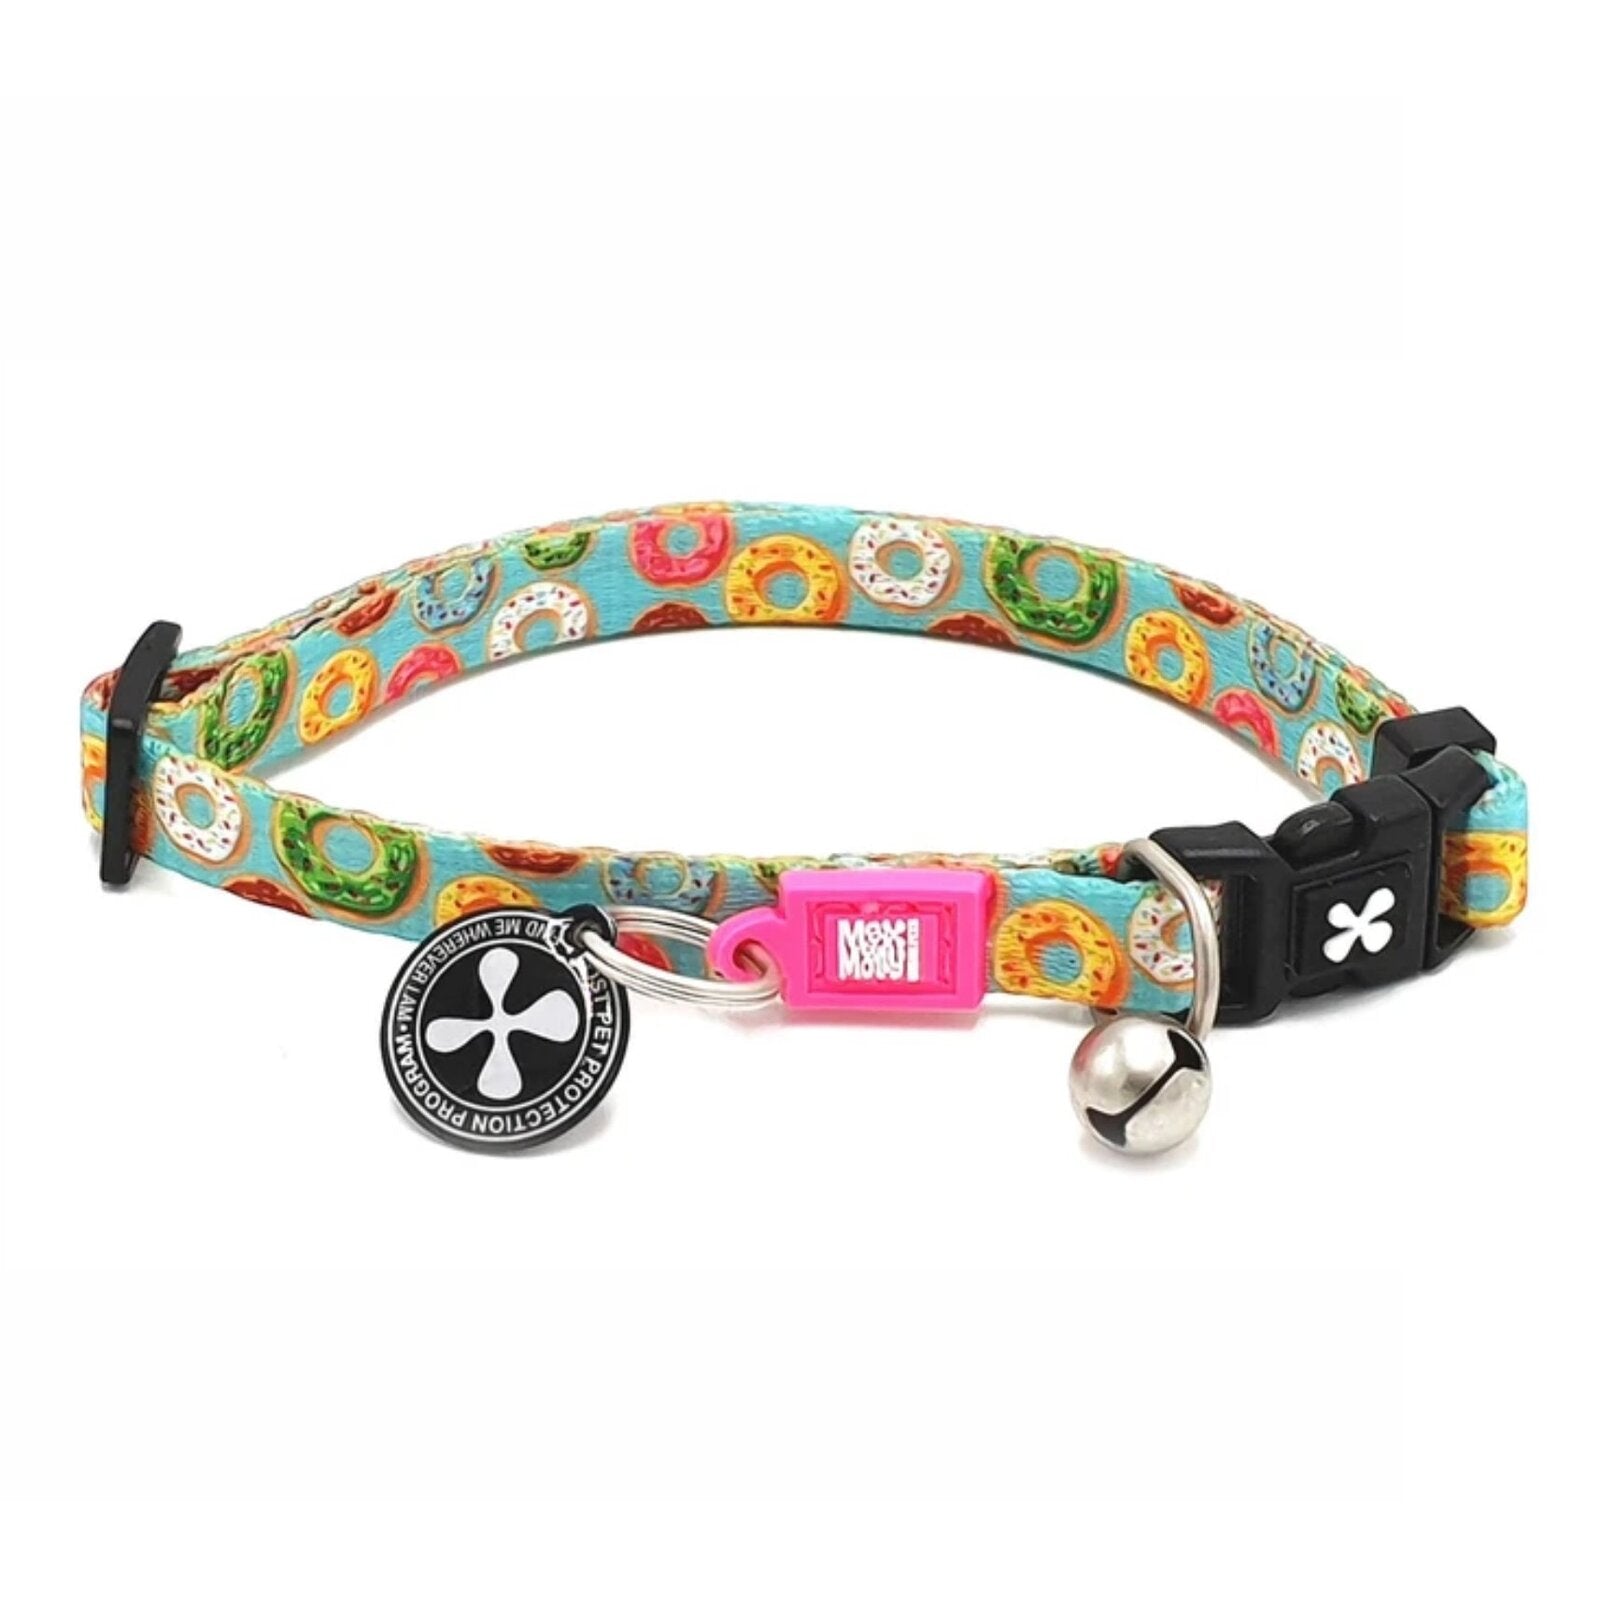 Max & Molly Smart ID Cat Collar - Donuts - Pets and More